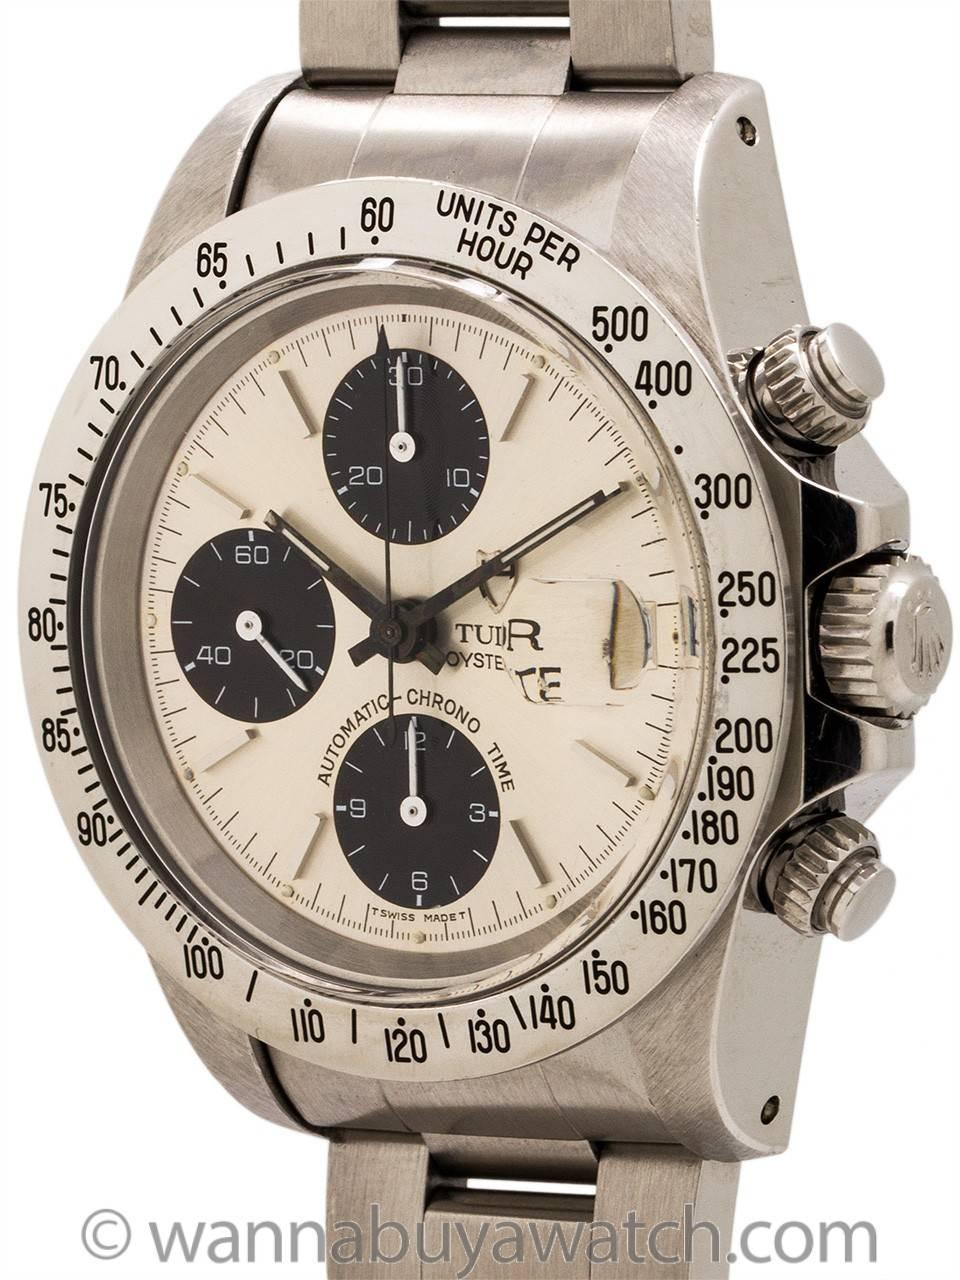 Tudor Oyster Date Chronograph ref # 79180 serial# B5 circa 1980s. 40mm diameter so called “Big Block” thick flat walled case with acrylic crystal and steel tachometer outer bezel. With original silver satin dial with black regsiters and silver